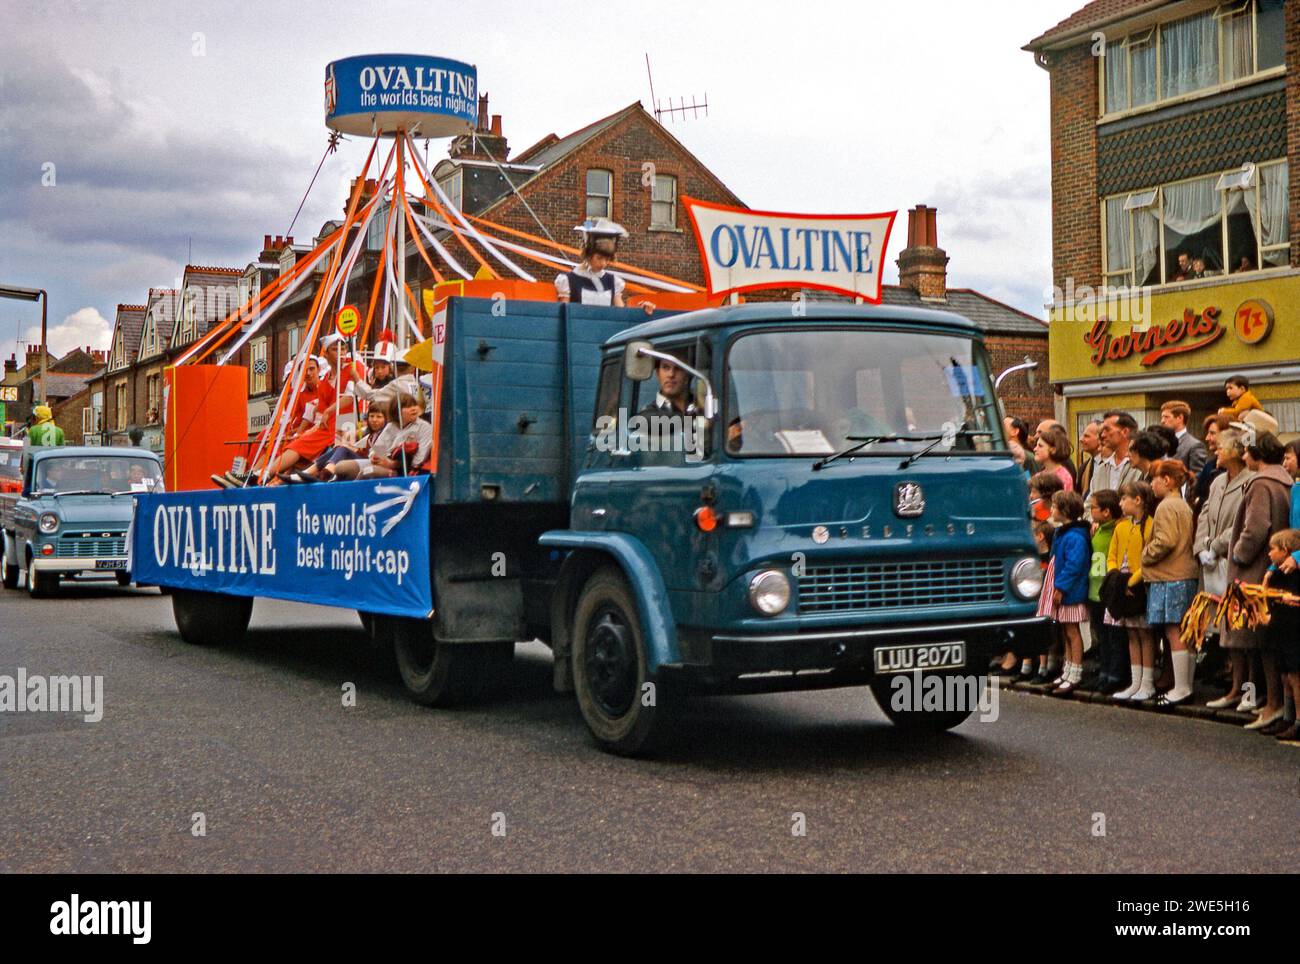 Watford's annual Whitsun Carnival parade proceeding along St Albans Road, Watford, Hertfordshire, England, UK, 1967. On the rear of Bedford flatbed lorry children promote bedtime drink Ovaltine, invented Switzerland 1904 by Doctor George Wander and launched in UK in 1909. A banner on side of truck states Ovaltine: the world's best night-cap. This image is from an old amateur Kodak colour transparency – a vintage 1960s photograph. Stock Photo